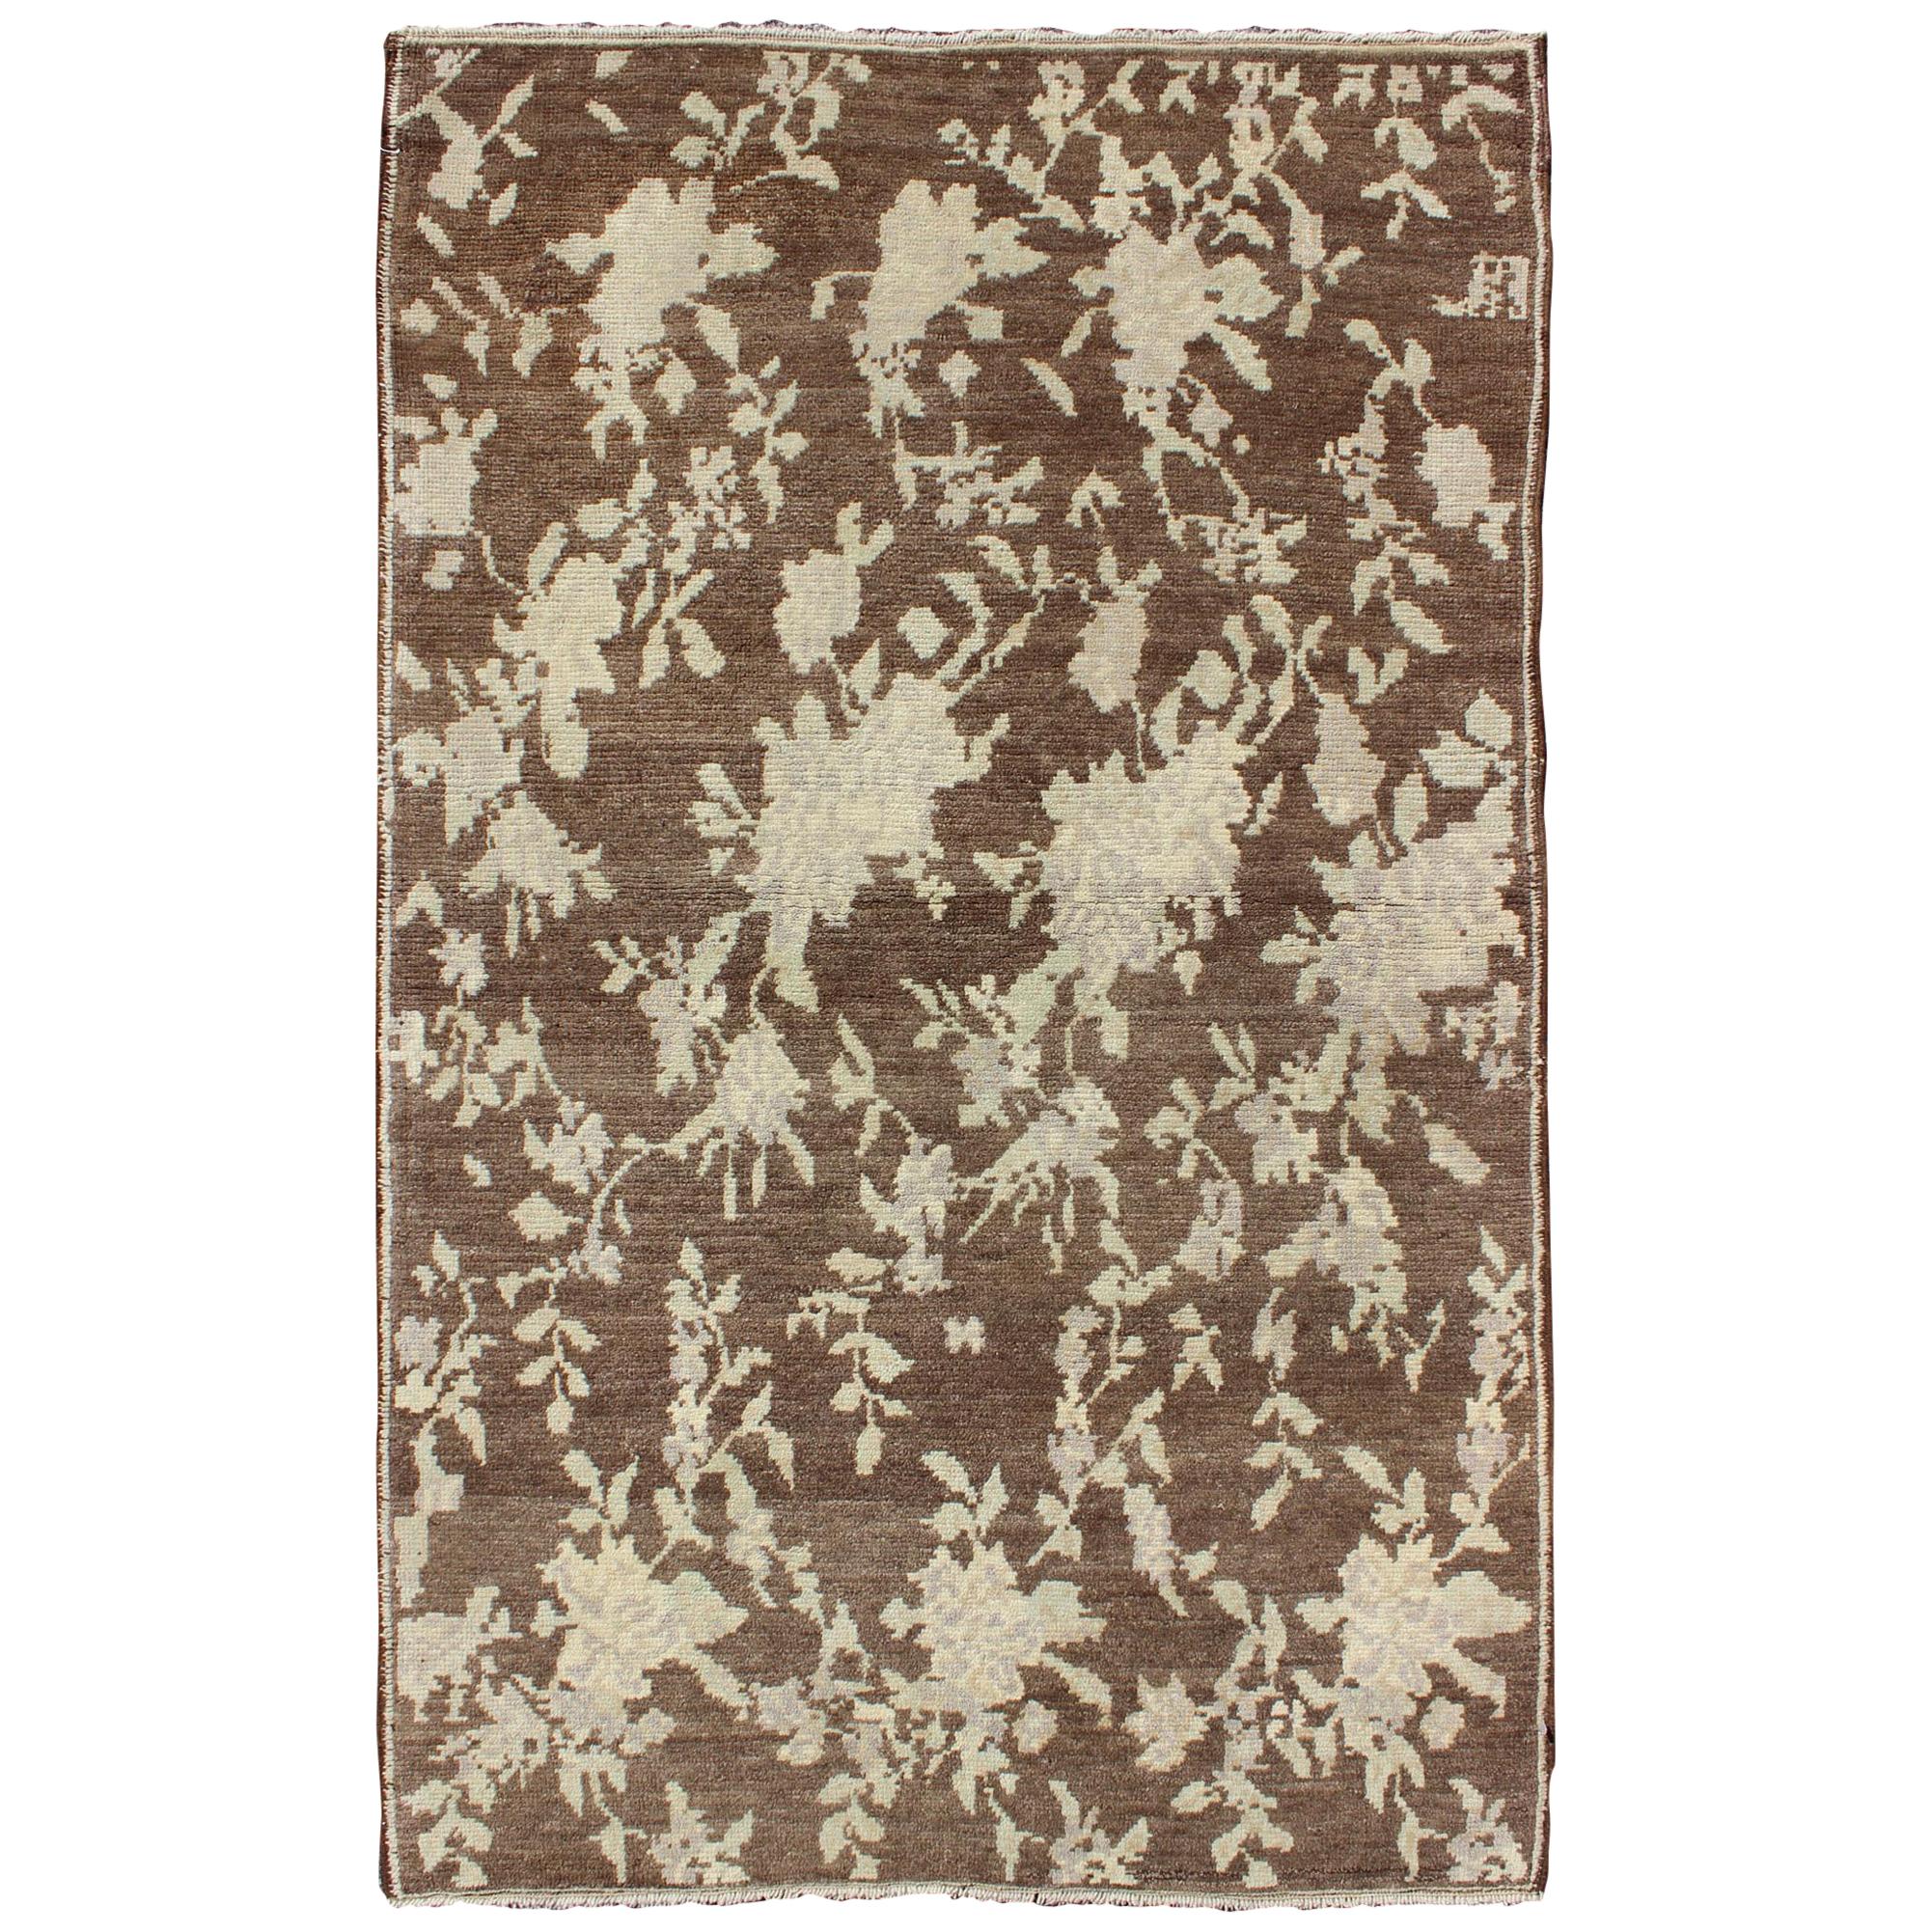 Mocha Vintage Turkish Oushak Rug with Free-Flowing Green & Cream Flower Blossoms